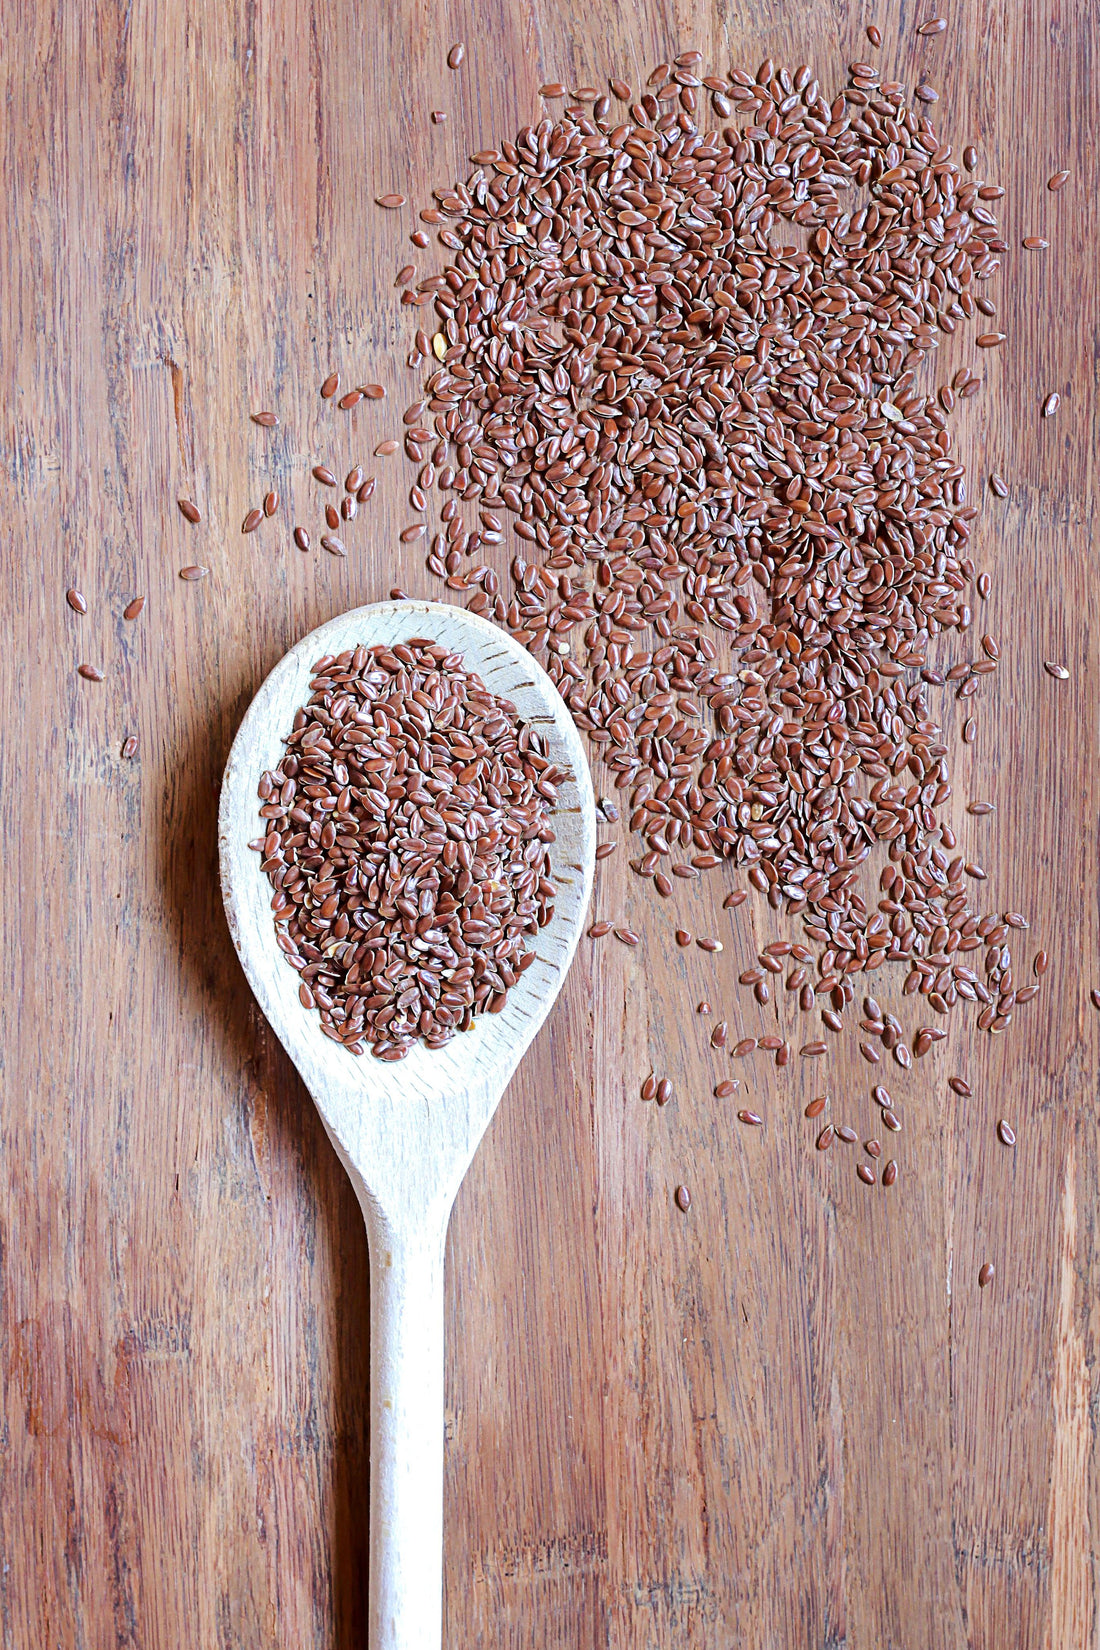 Flax Seeds & Breast Cancer! Michael Greger M.D. FACLM